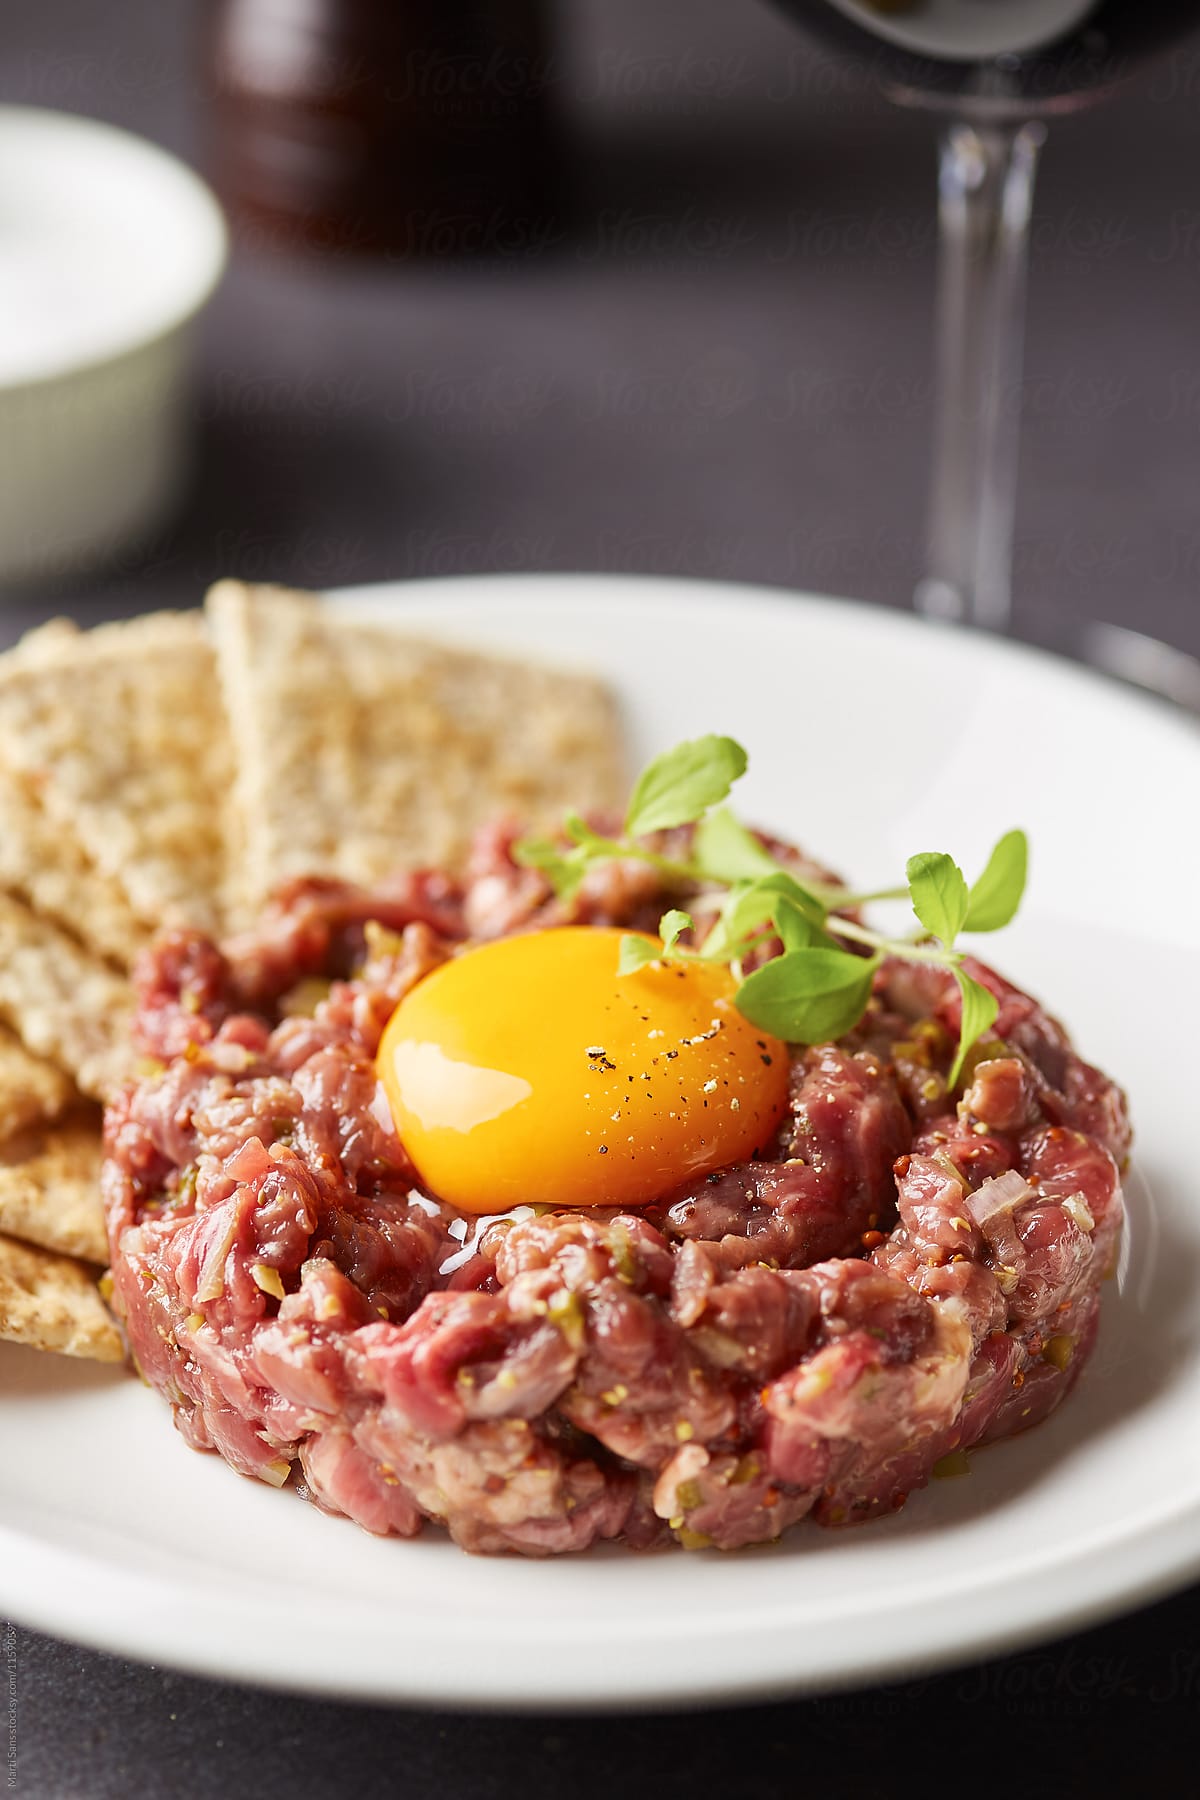 Homemade tartare with egg yolk on plate with crackers.